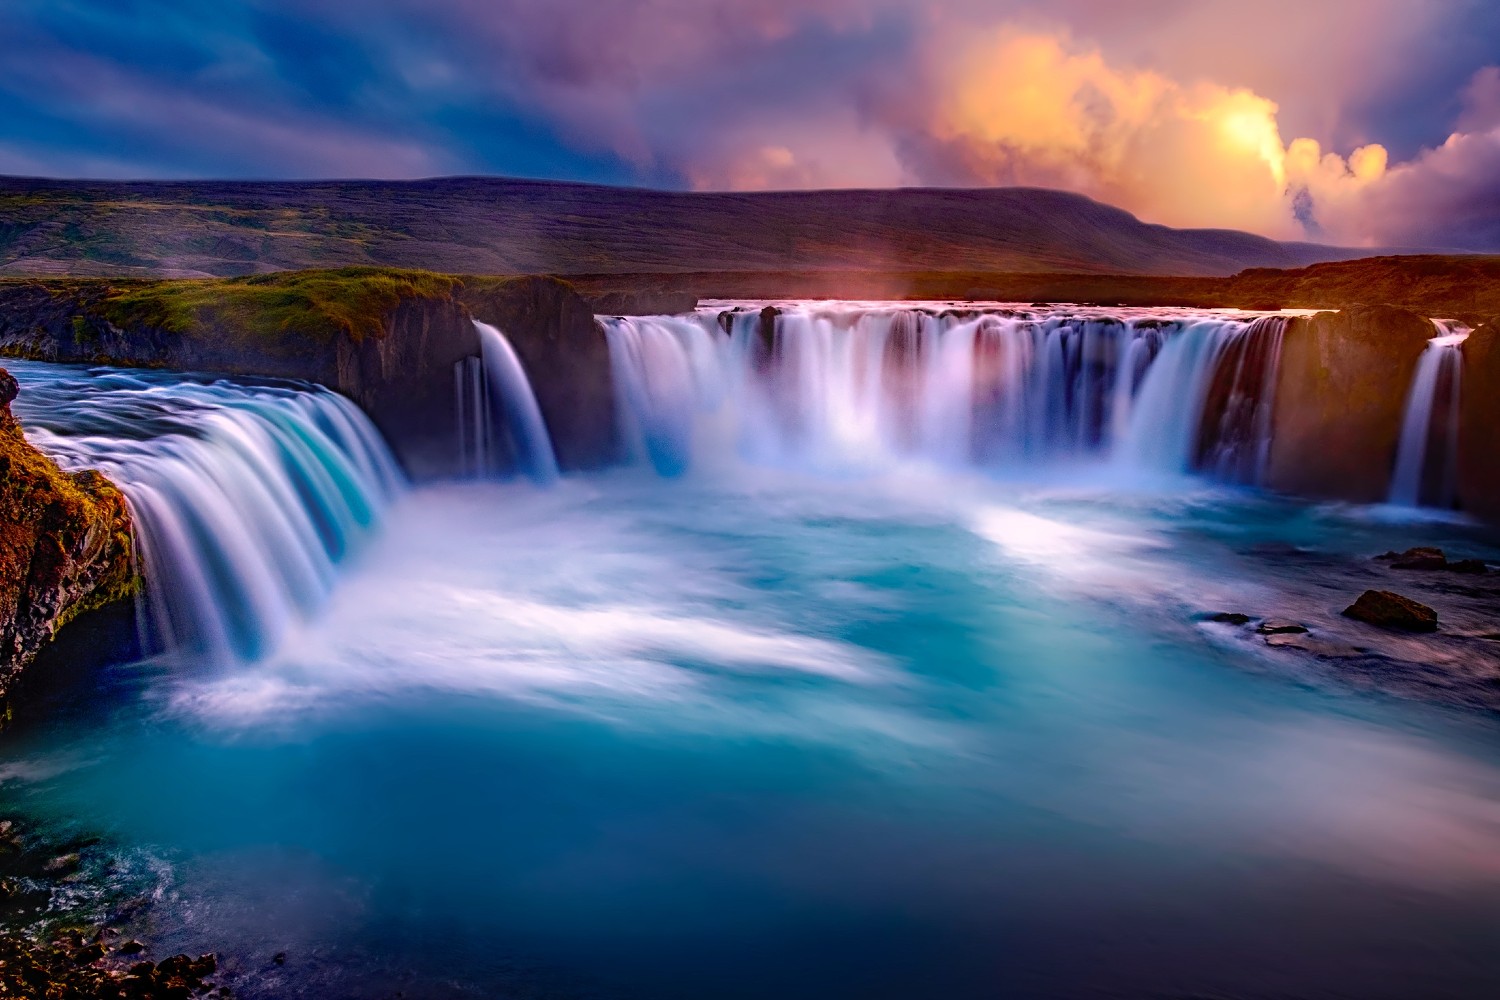 The Goðafoss waterfall in Iceland's Diamond Circle.